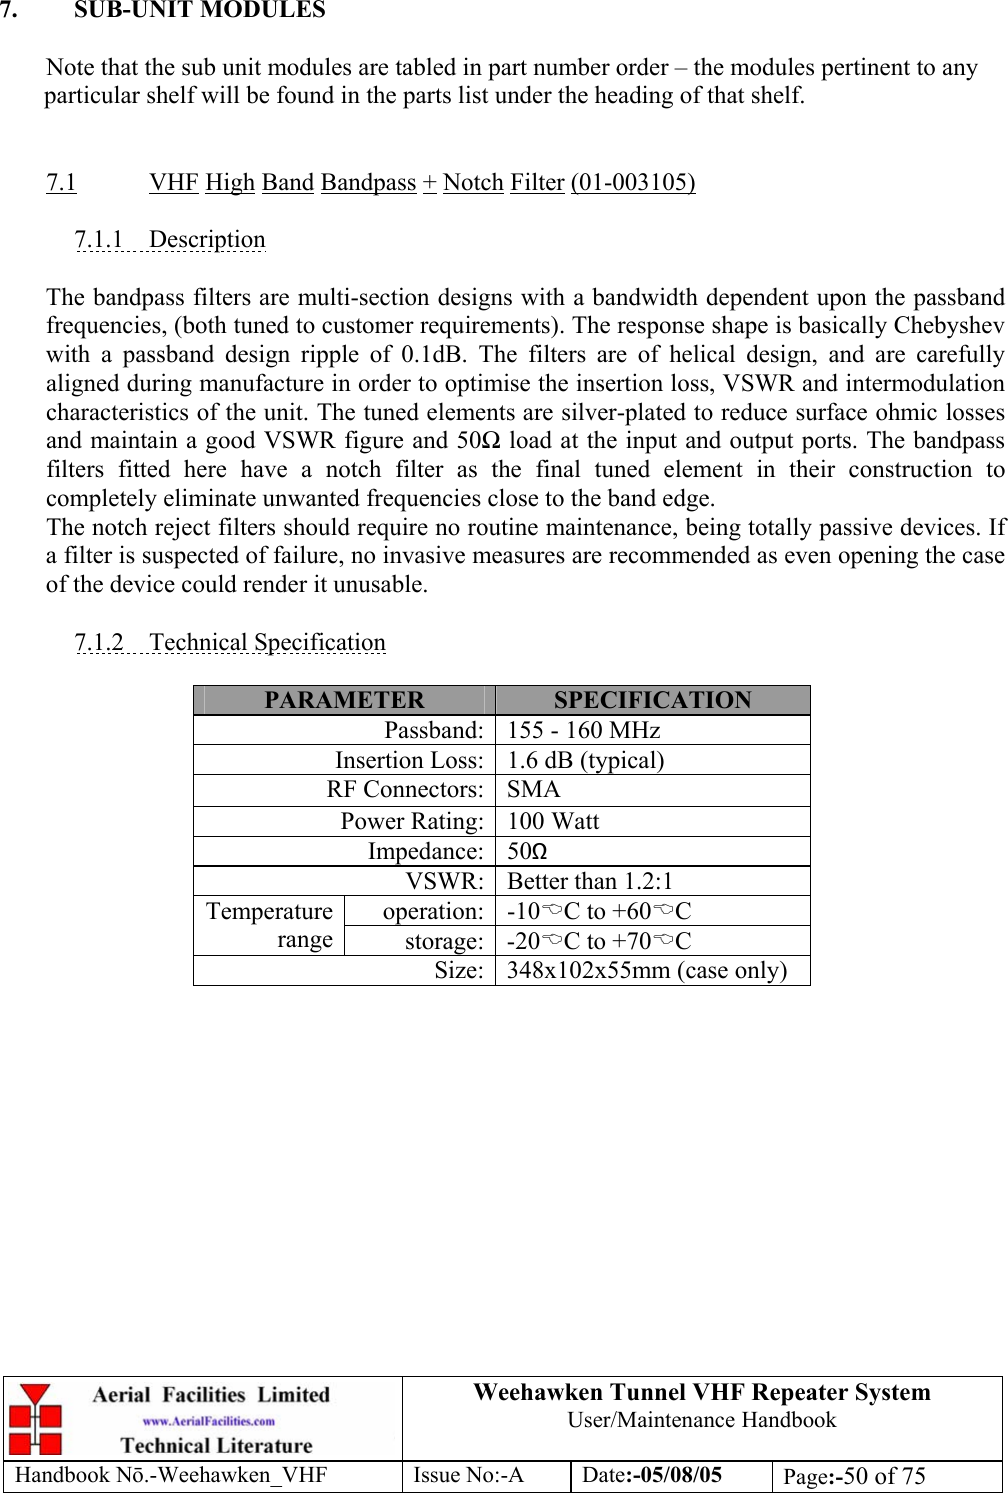  Weehawken Tunnel VHF Repeater System User/Maintenance Handbook Handbook N.-Weehawken_VHF Issue No:-A Date:-05/08/05  Page:-50 of 75   7. SUB-UNIT MODULES  Note that the sub unit modules are tabled in part number order – the modules pertinent to any particular shelf will be found in the parts list under the heading of that shelf.   7.1 VHF High Band Bandpass + Notch Filter (01-003105)  7.1.1 Description  The bandpass filters are multi-section designs with a bandwidth dependent upon the passband frequencies, (both tuned to customer requirements). The response shape is basically Chebyshev with a passband design ripple of 0.1dB. The filters are of helical design, and are carefully aligned during manufacture in order to optimise the insertion loss, VSWR and intermodulation characteristics of the unit. The tuned elements are silver-plated to reduce surface ohmic losses and maintain a good VSWR figure and 50 load at the input and output ports. The bandpass filters fitted here have a notch filter as the final tuned element in their construction to completely eliminate unwanted frequencies close to the band edge. The notch reject filters should require no routine maintenance, being totally passive devices. If a filter is suspected of failure, no invasive measures are recommended as even opening the case of the device could render it unusable.  7.1.2 Technical Specification  PARAMETER  SPECIFICATION Passband: 155 - 160 MHz Insertion Loss: 1.6 dB (typical) RF Connectors: SMA Power Rating: 100 Watt Impedance: 50Ω VSWR: Better than 1.2:1 operation: -10%C to +60%C Temperature range  storage: -20%C to +70%C Size: 348x102x55mm (case only)  